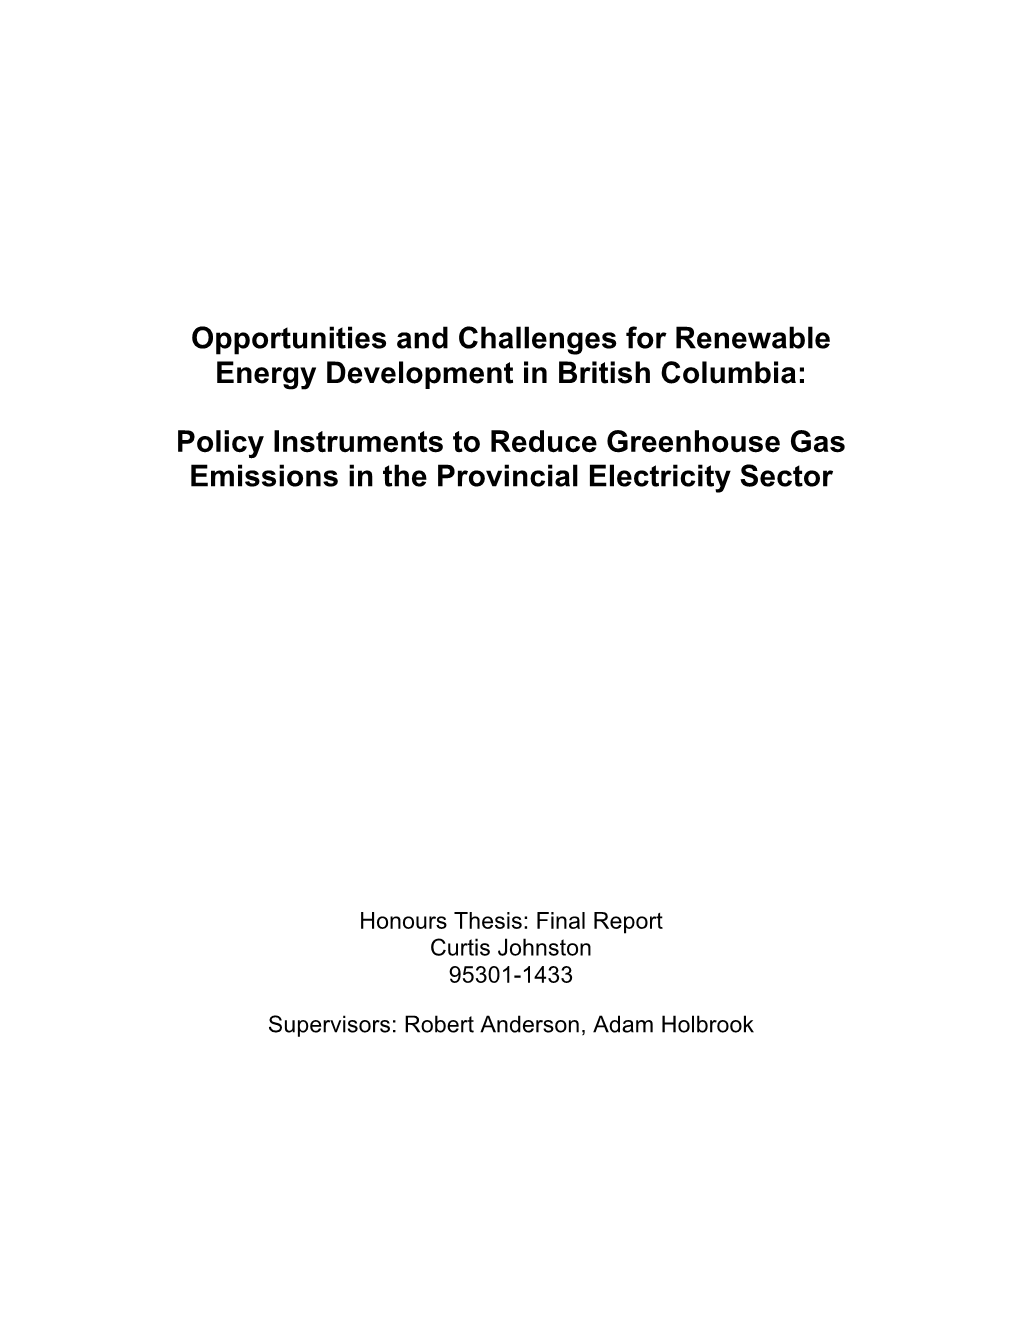 Opportunities and Challenges for Renewable Energy Development in British Columbia